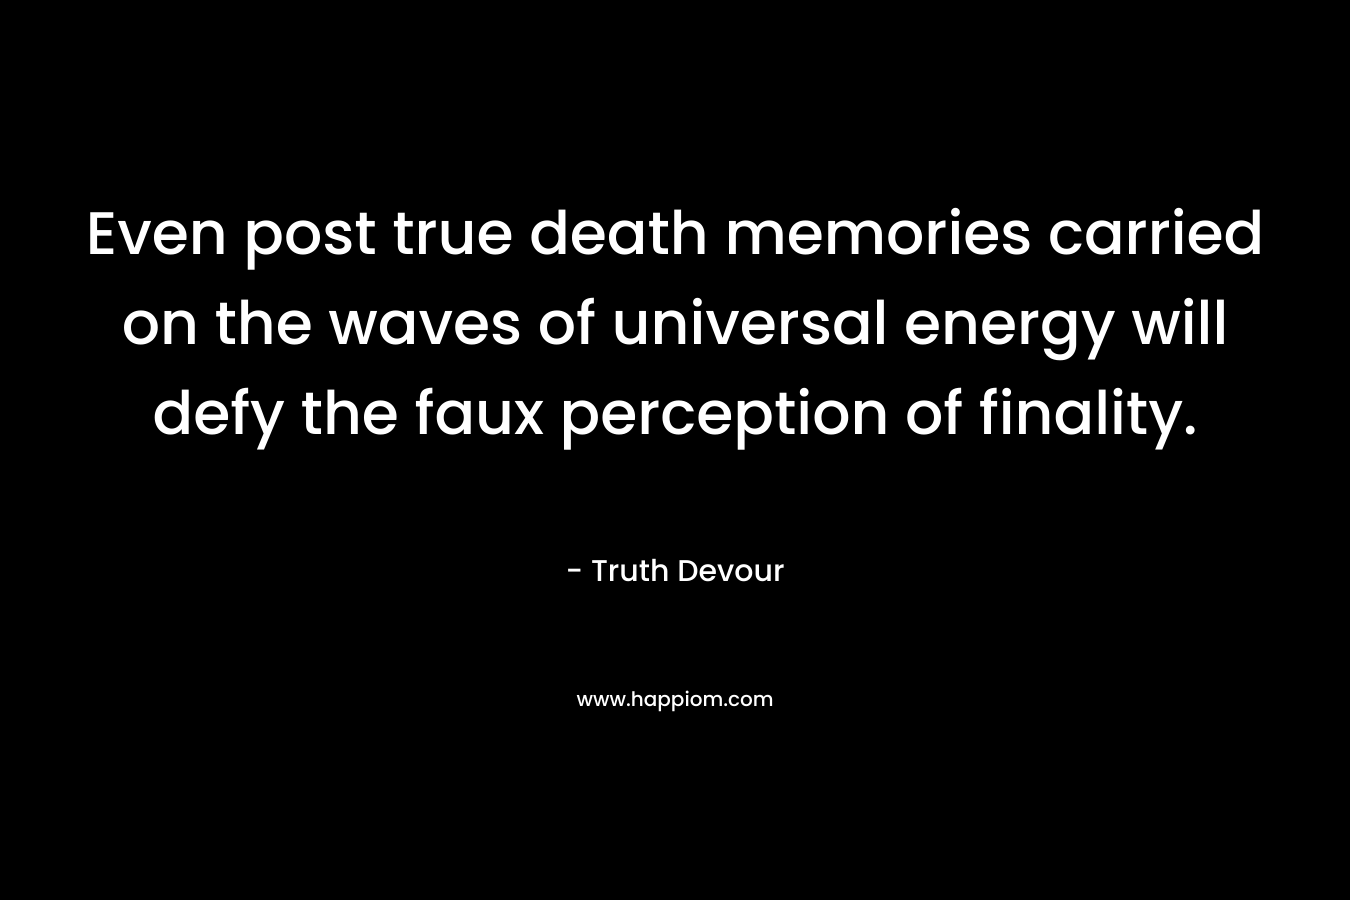 Even post true death memories carried on the waves of universal energy will defy the faux perception of finality.